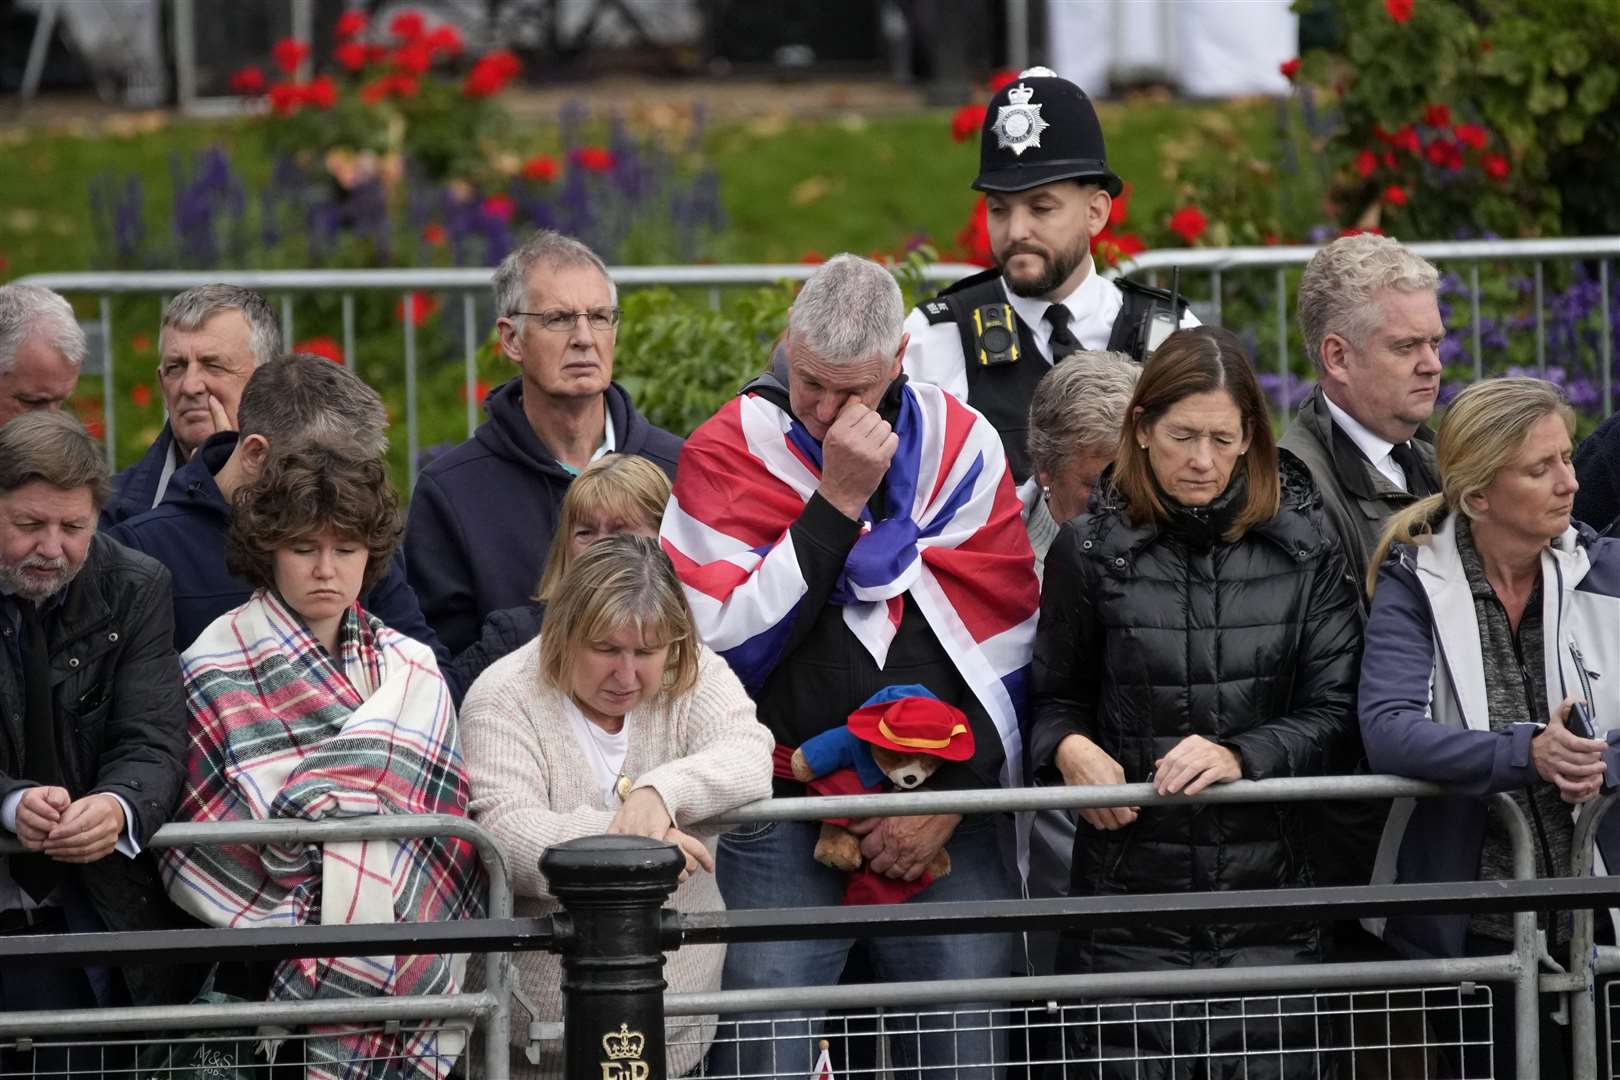 Members of the public, one of them holding a Paddington Bear toy, outside Buckingham Palace watching the funeral procession (Christophe Ena/PA)